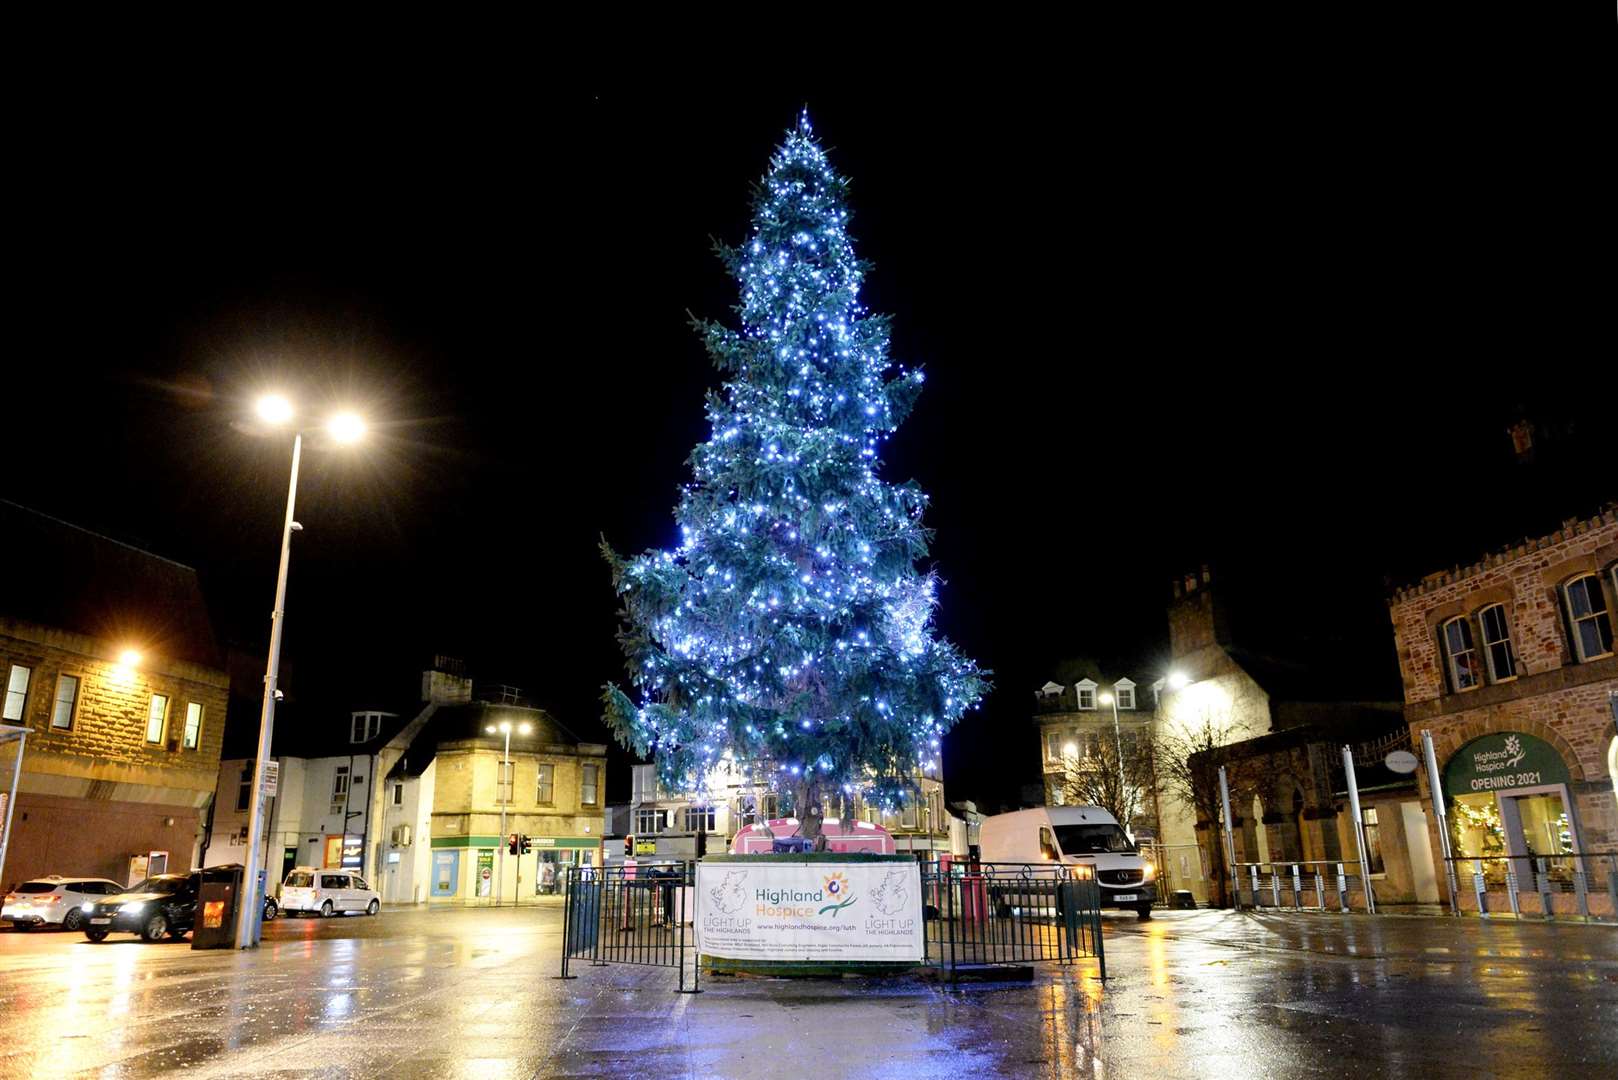 The Highland Hospice Christmas Tree in Falcon Square. Picture: James Mackenzie.